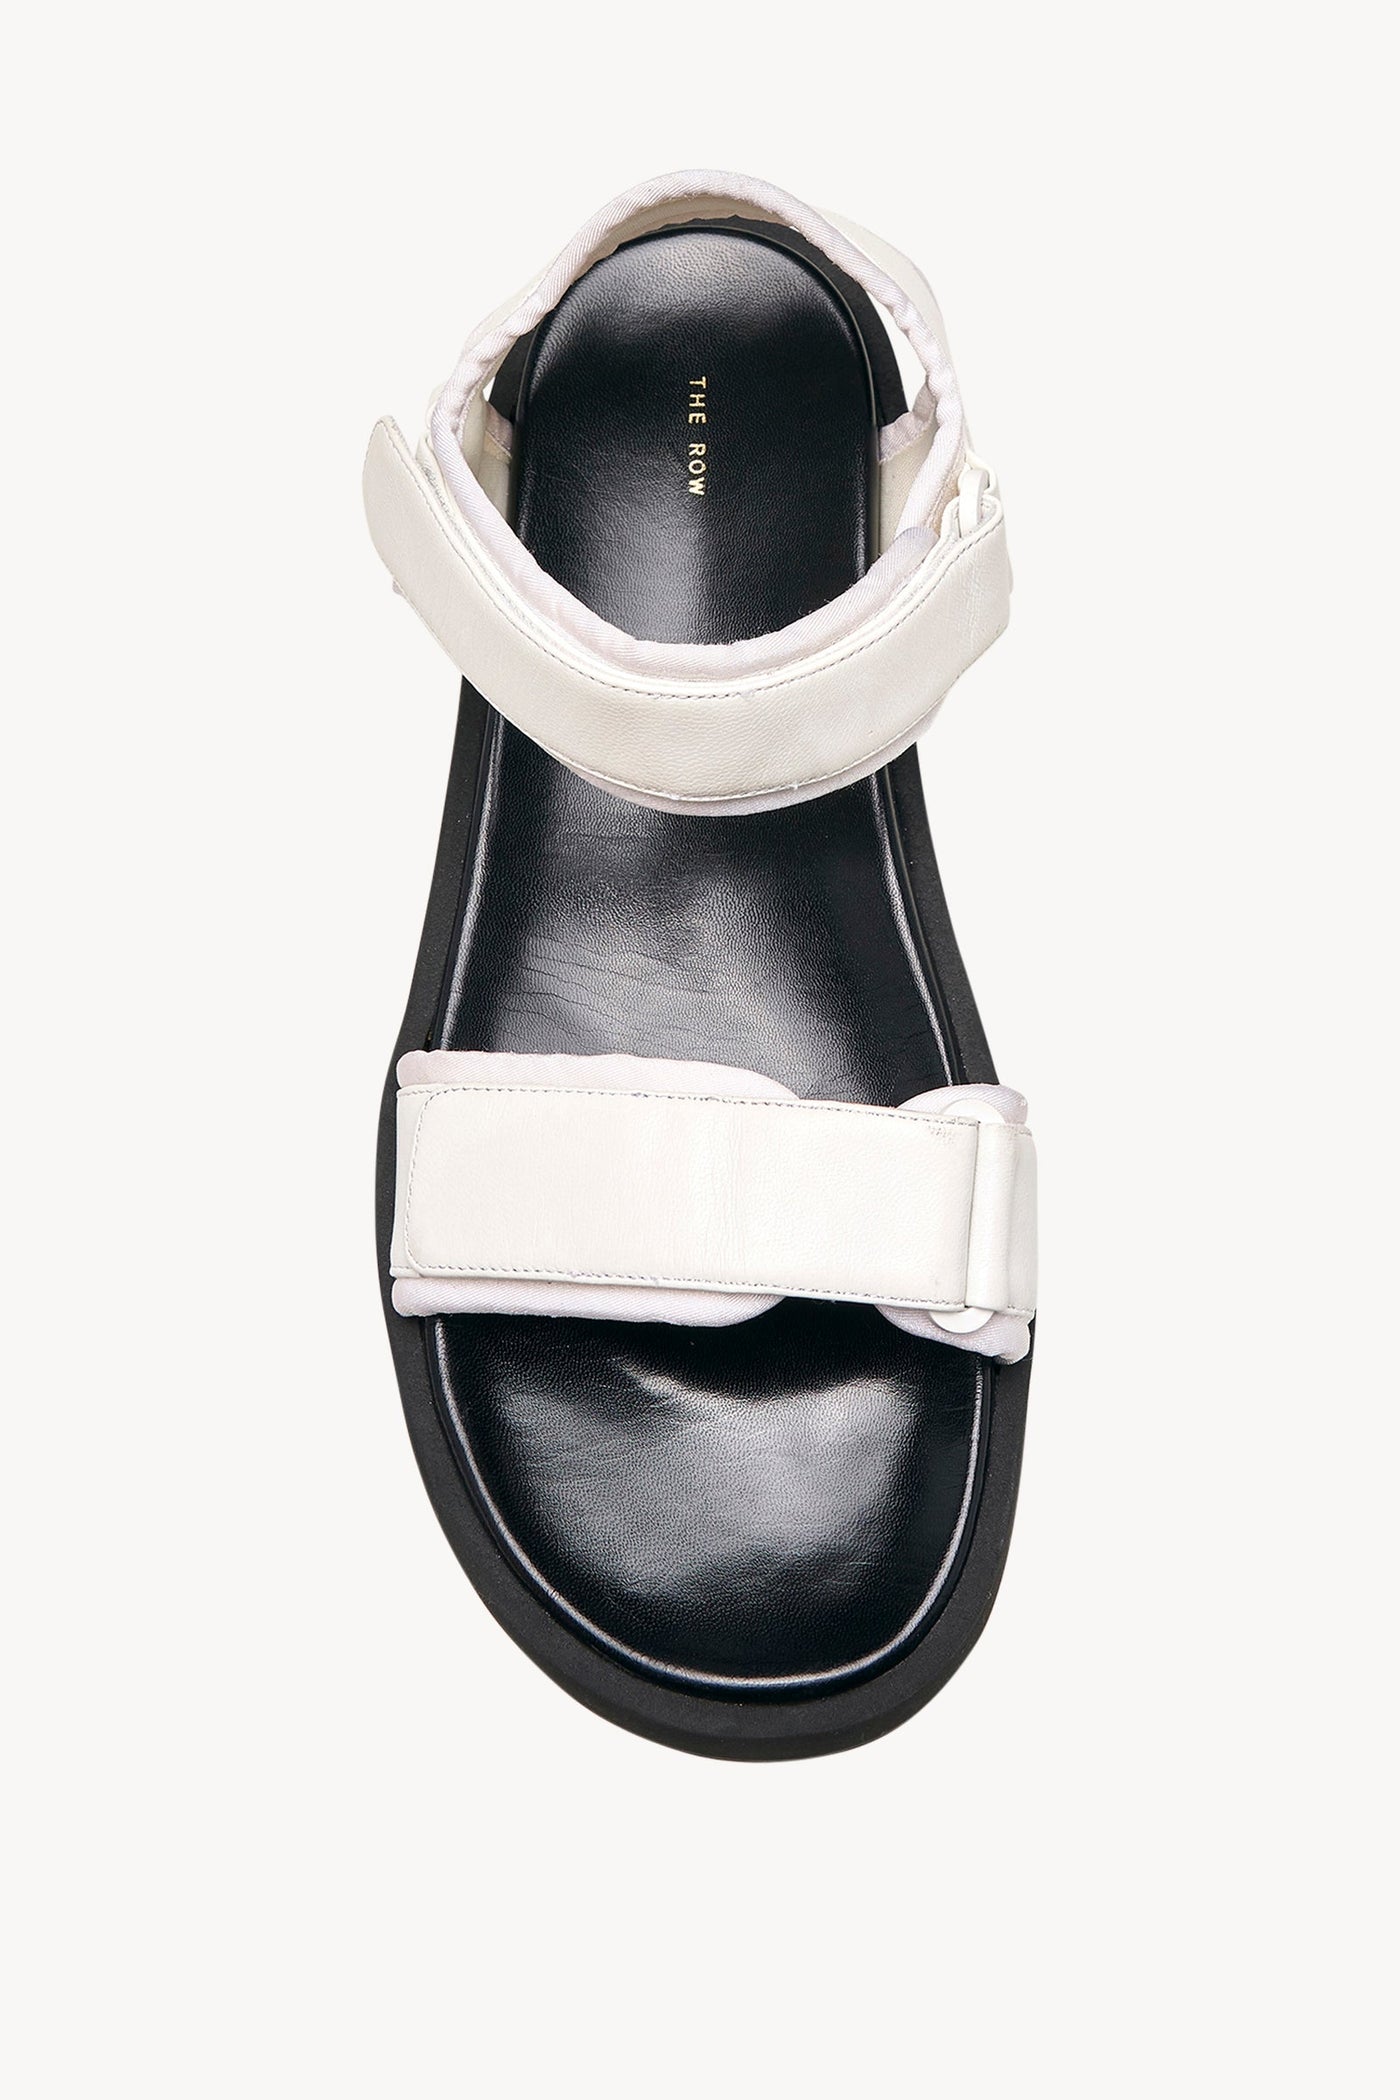 the-row-hook-and-loop-sandal-white-amarees